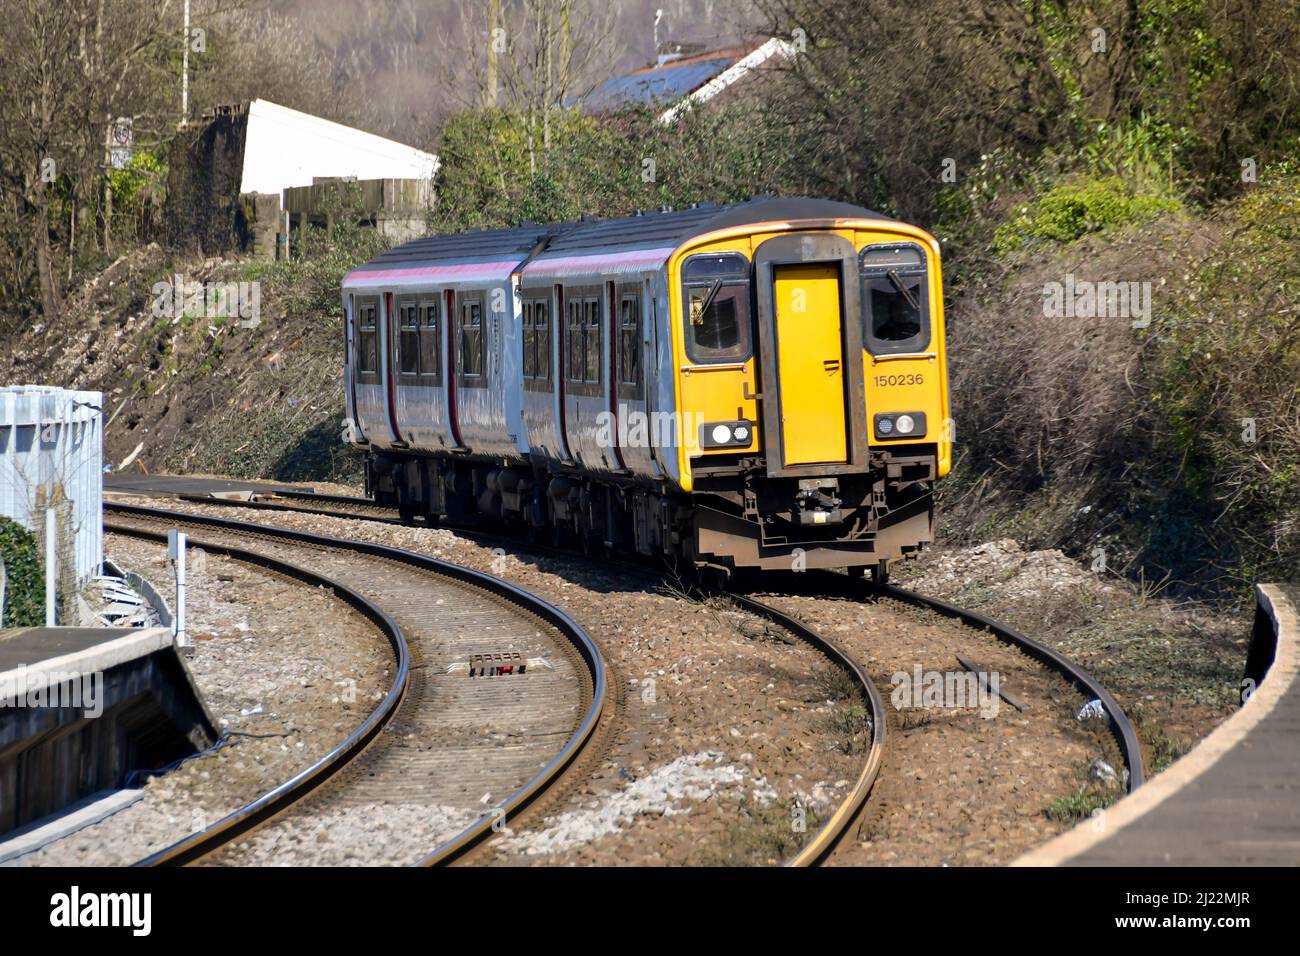 Treforest, Wales - March 2022: Commuter train operated by Transport for Wales approaching the railway station at Treforest on its way to Cardiff. Stock Photo